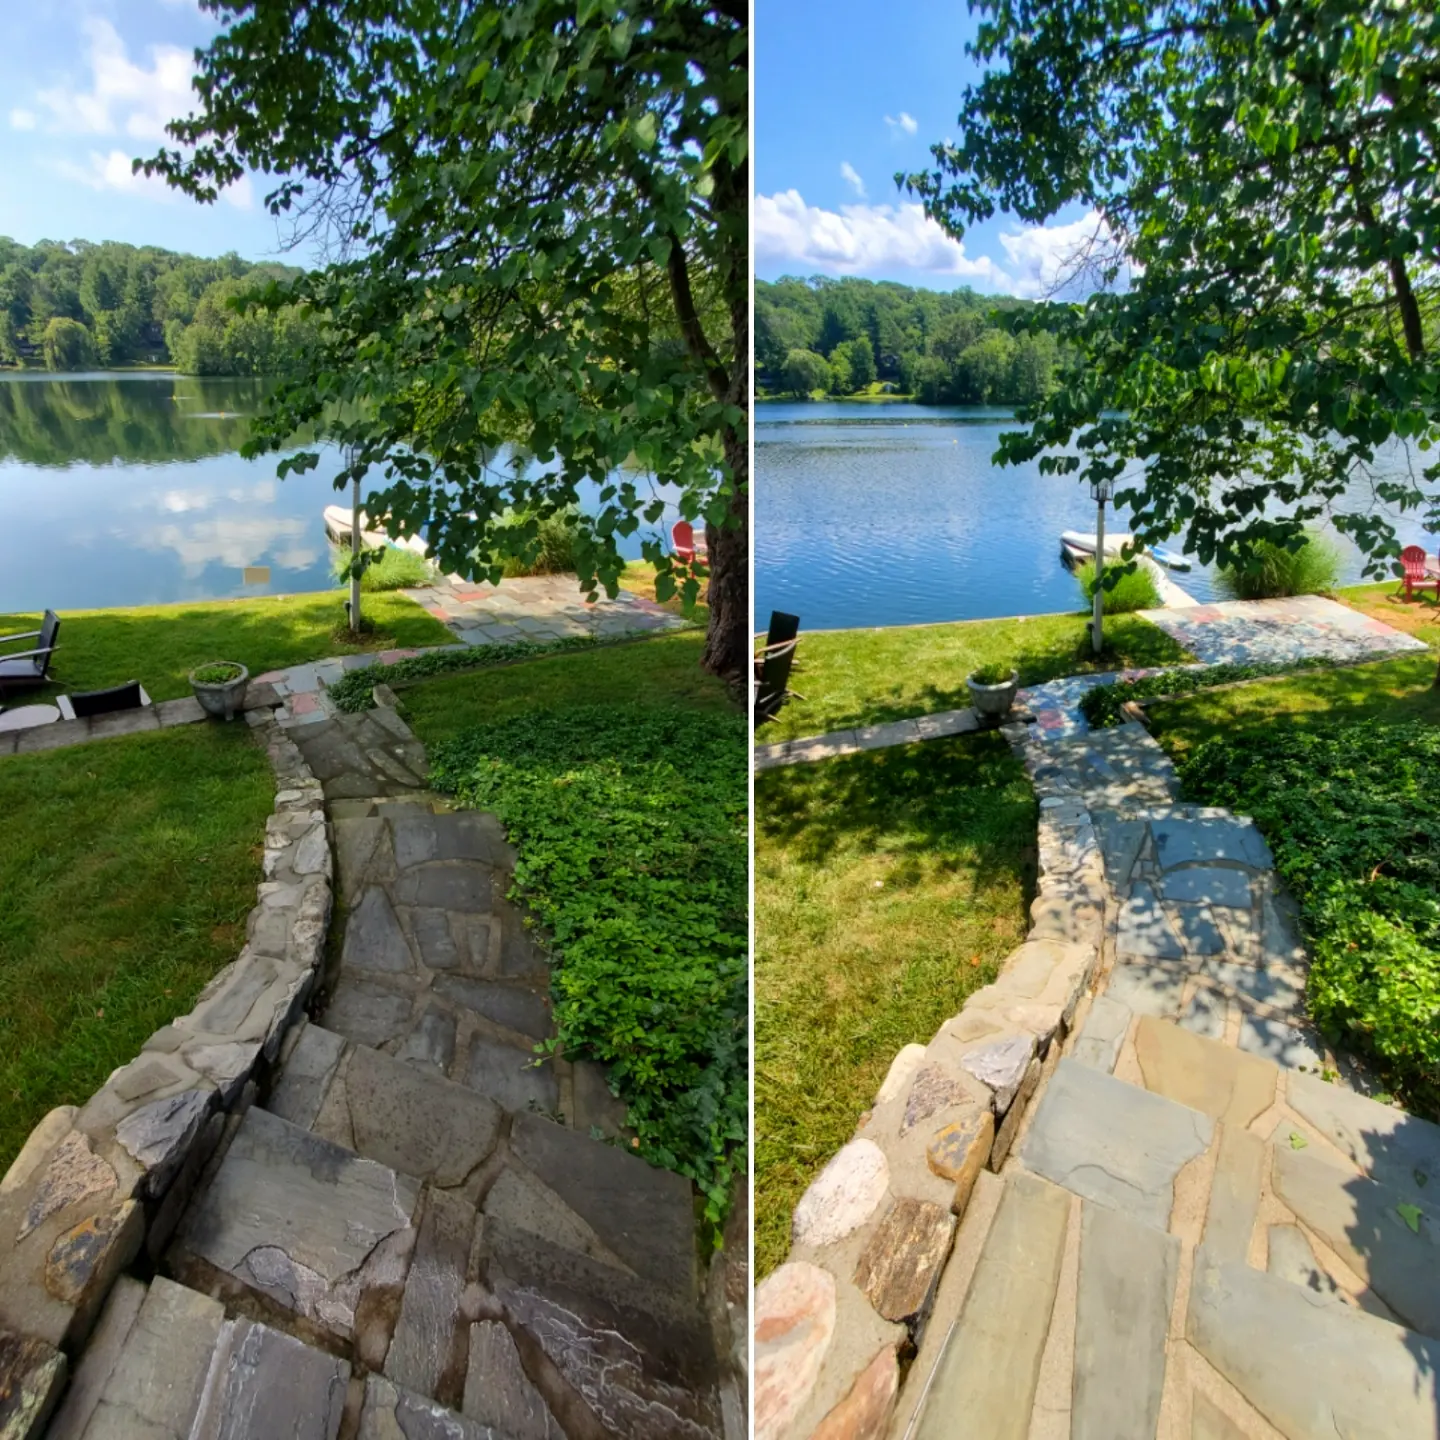 Walkway and Concrete Cleaning in Lake Mohawk, NJ